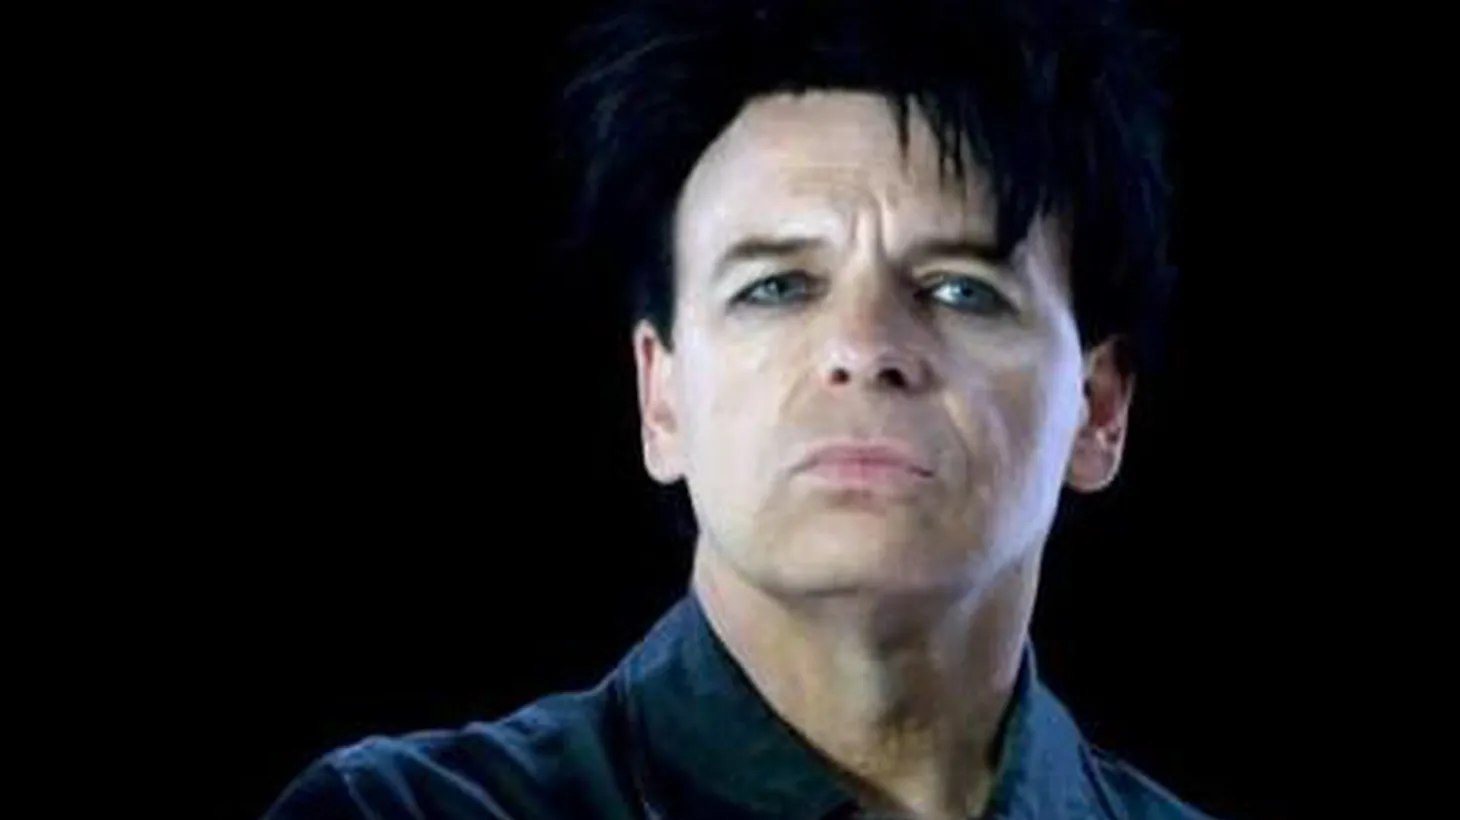 New wave pioneer Gary Numan joins us for his Morning Becomes Eclectic debut performance at 11:15am.